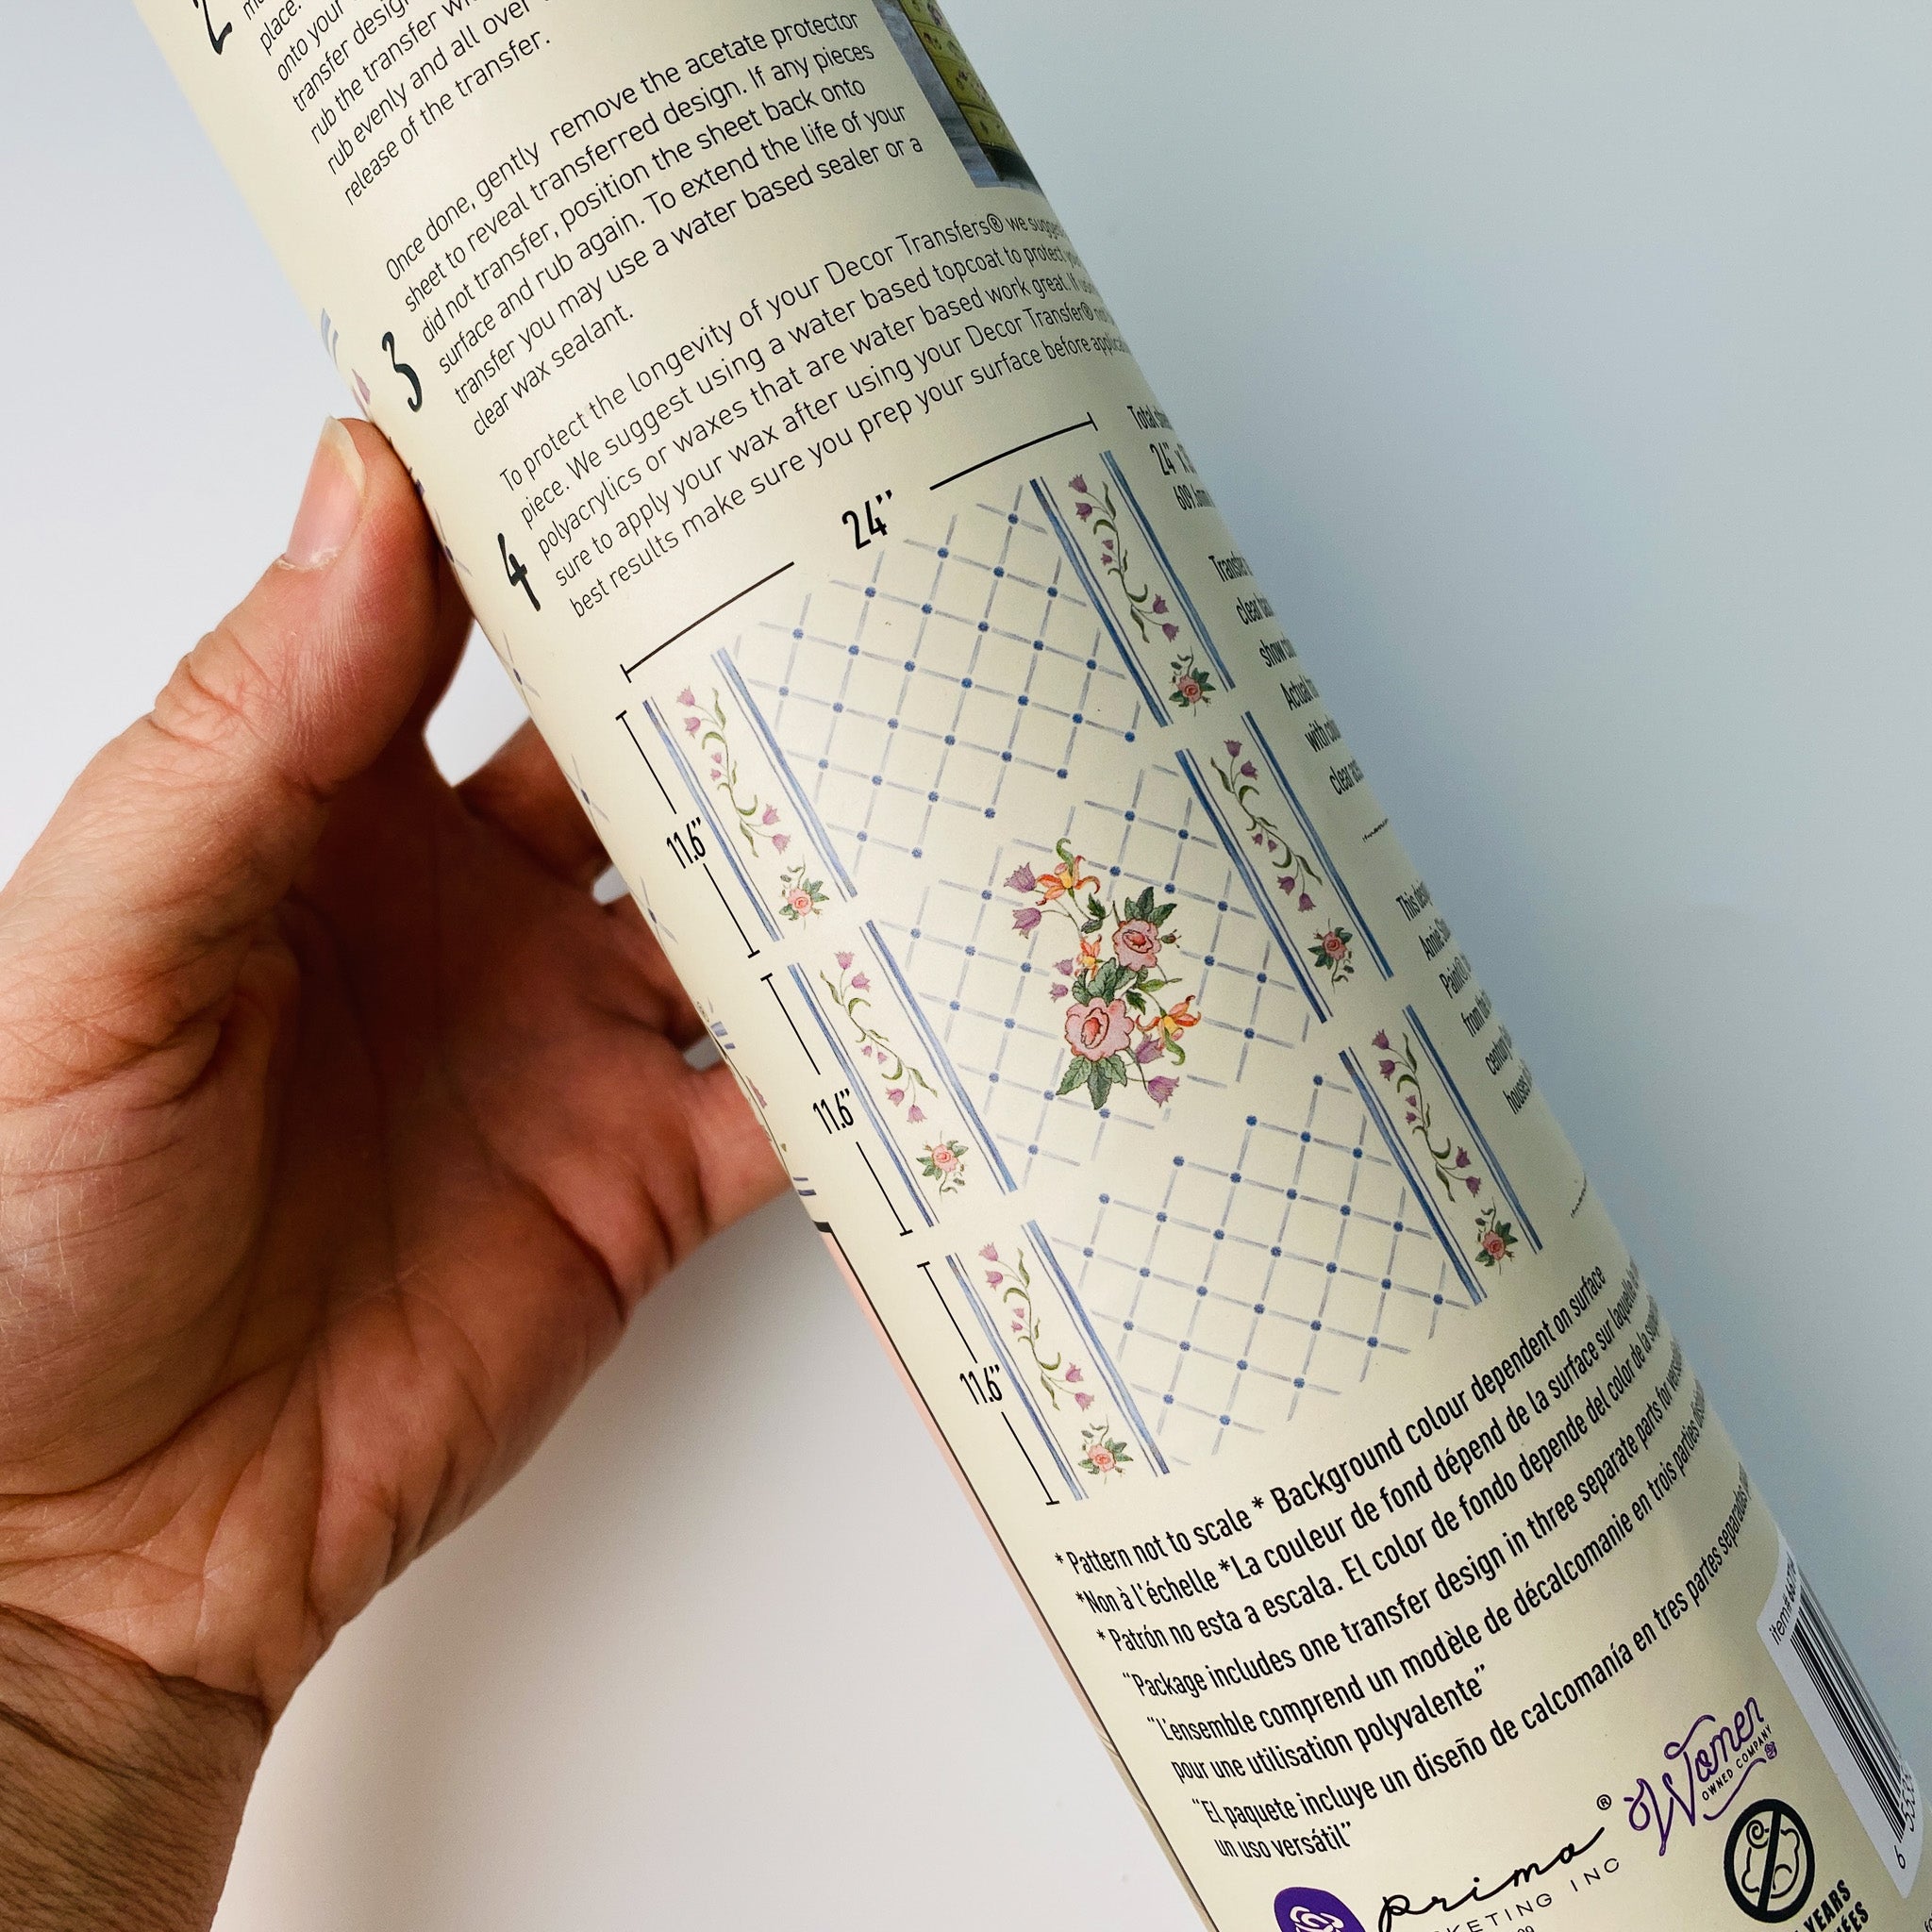 A hand is shown holding the tube that shows the measurements of 3 sheets of ReDesign with Prima's Annie Sloan Swedish Posy furniture transfer.